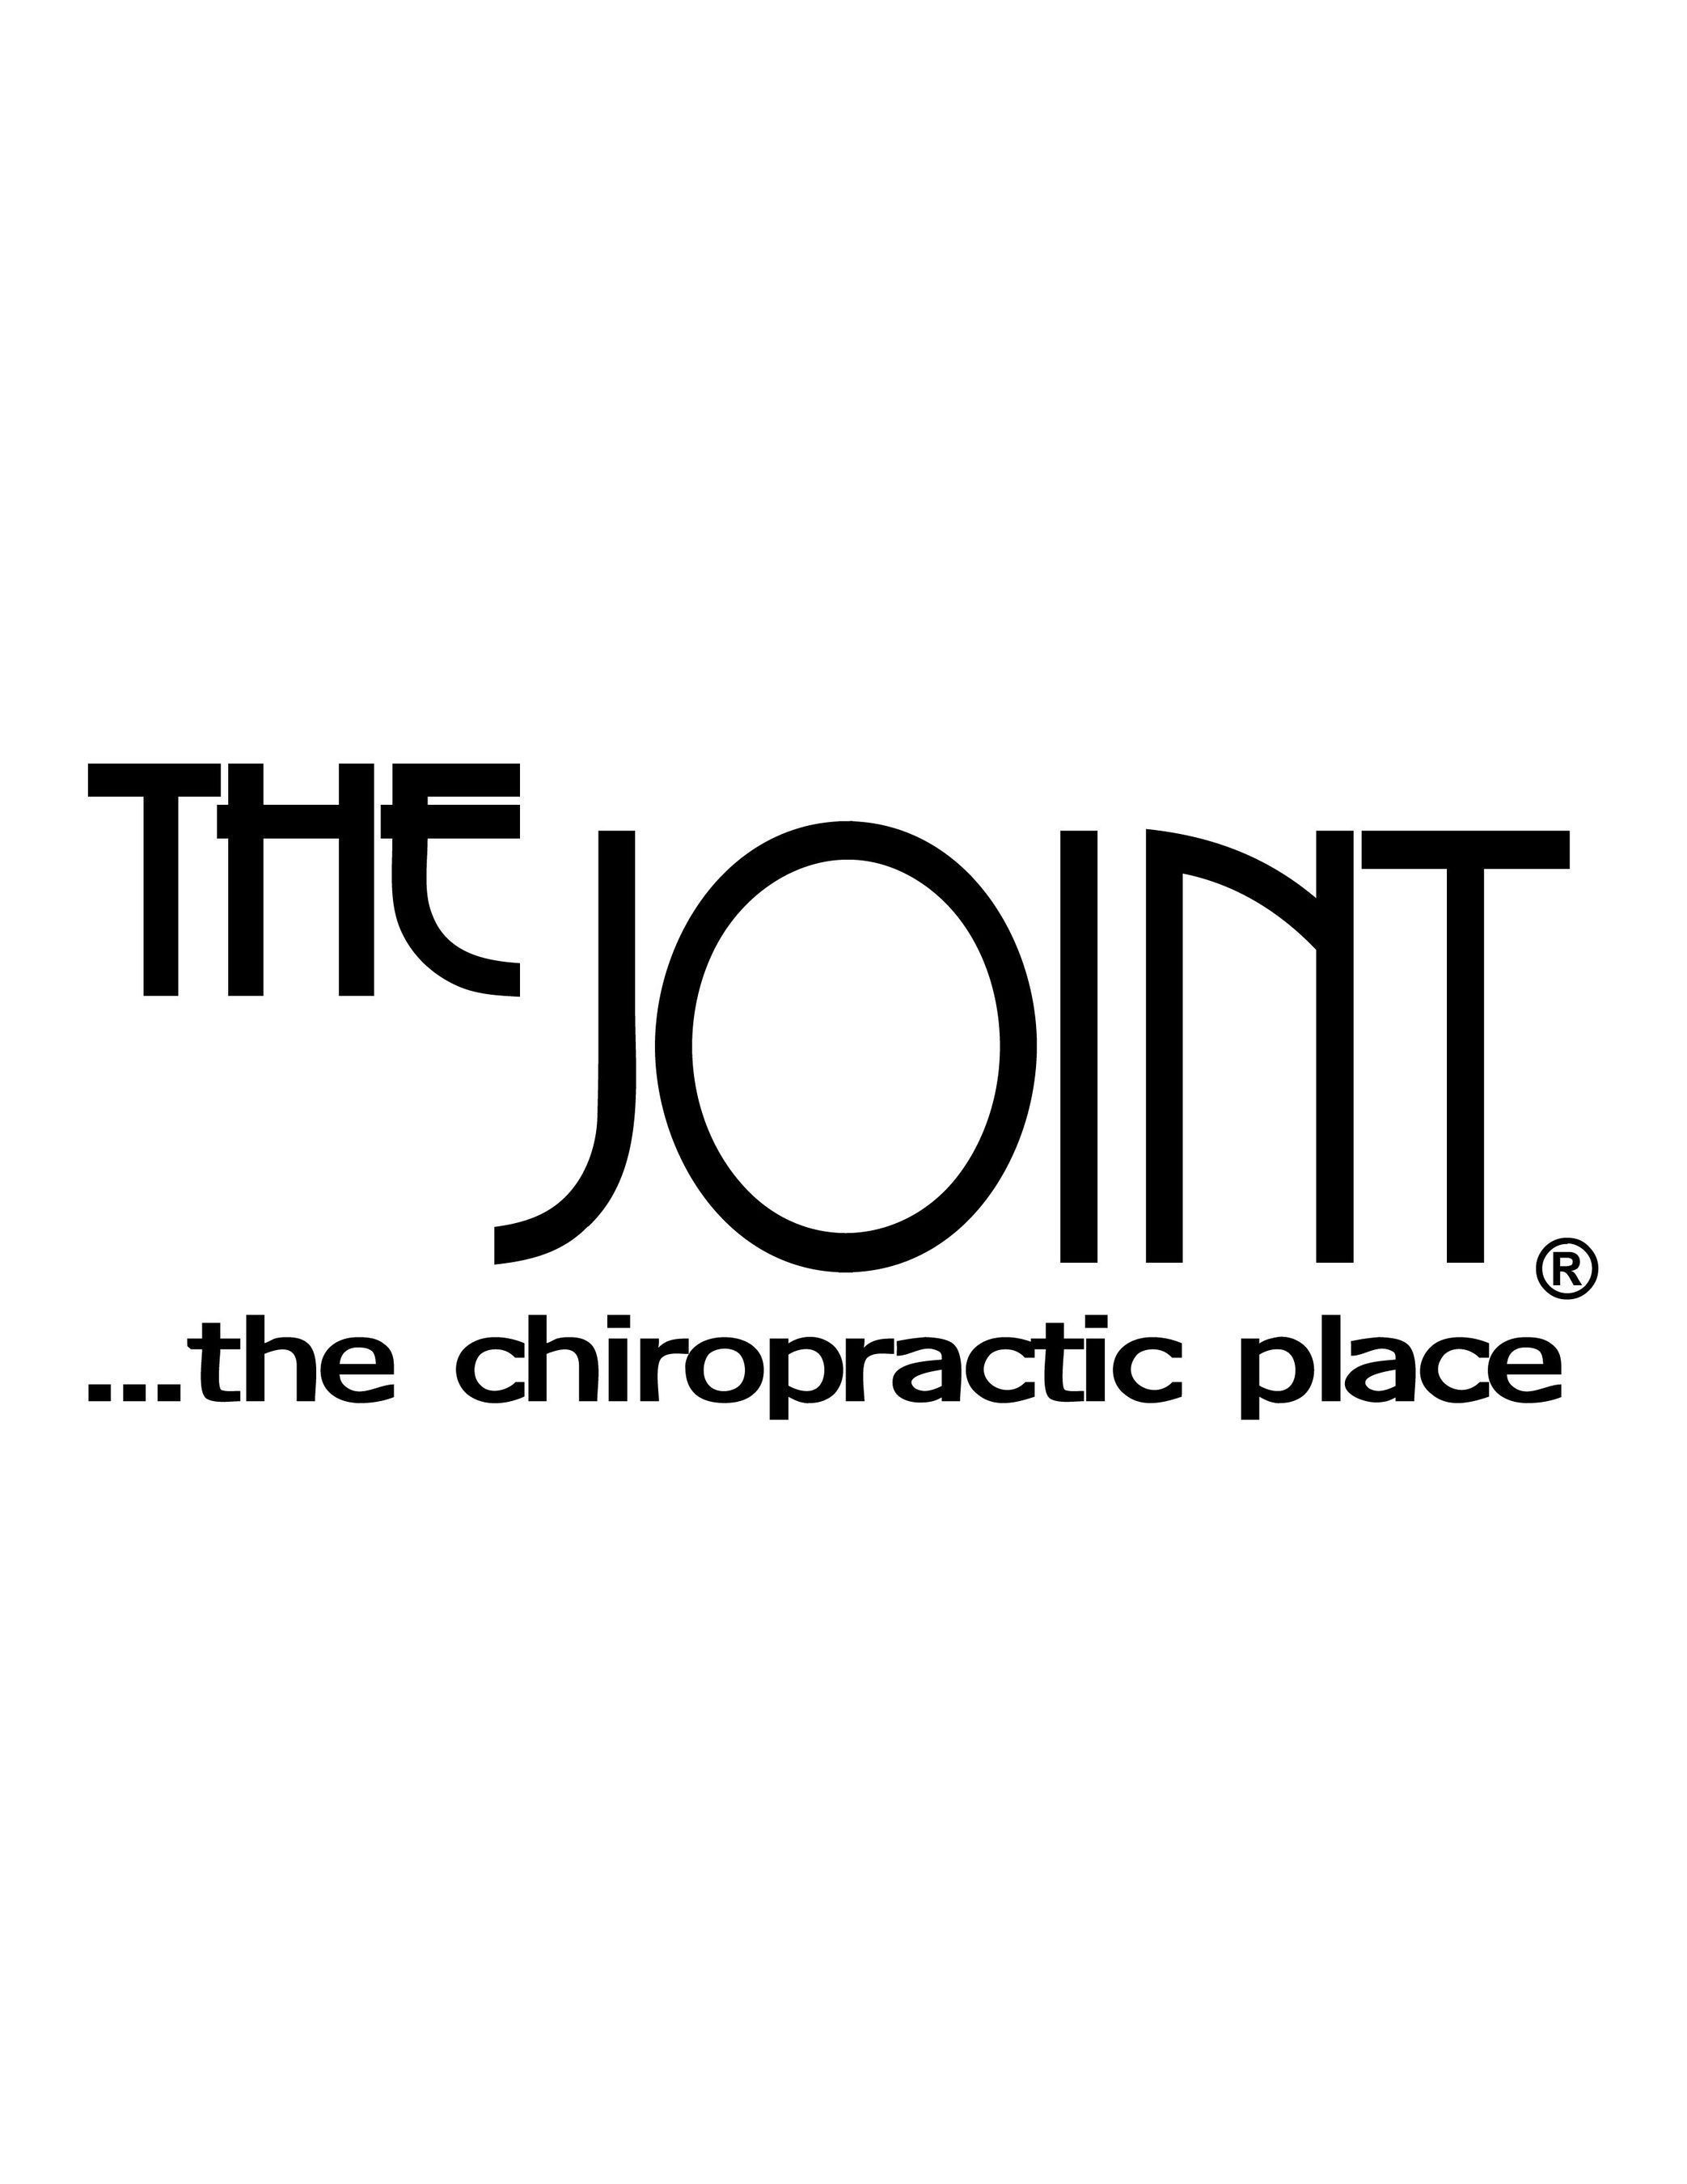 The Joint…the chiropractic place(R), is reinventing chiropractic care through a franchise model that makes quality alternative healthcare affordable for patients while simplifying business operations for chiropractors and franchise owners. Its affordable membership plans eliminate the need for insurance, and its no-appointments policy and convenient locations make care more accessible. The company has more than 200 clinics open and 450 in development in 30 states.